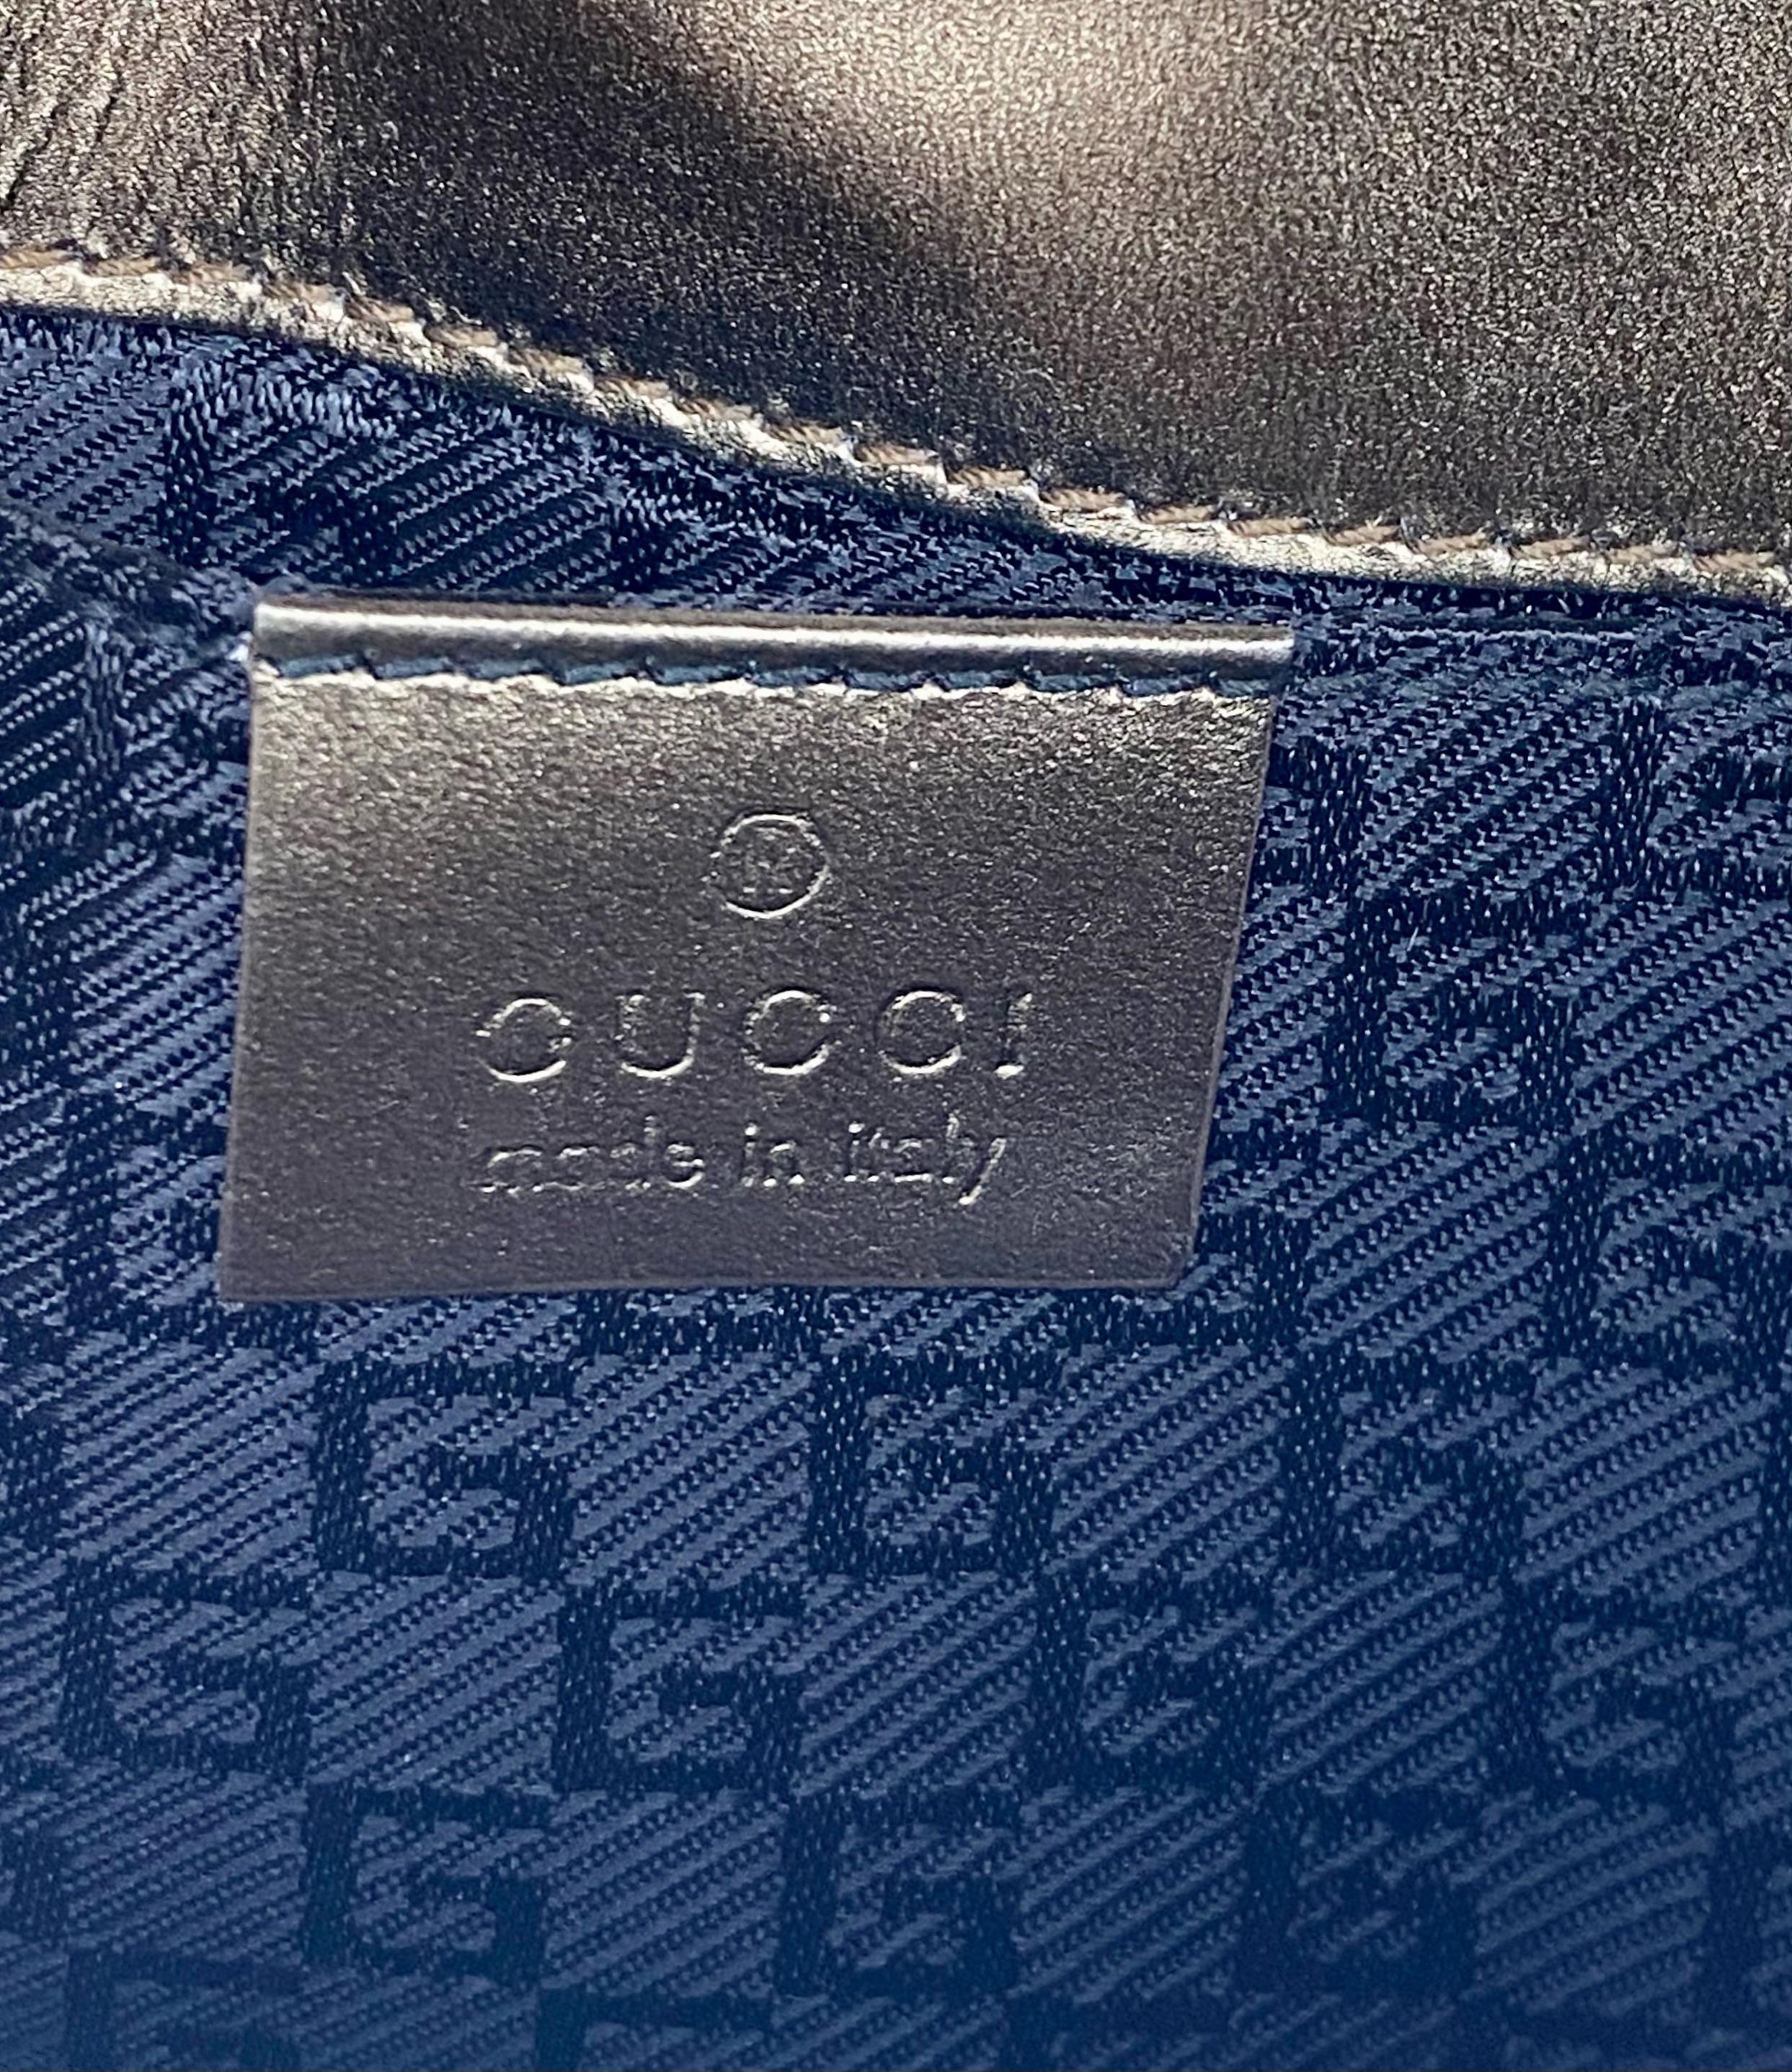 F/W 2000 Gucci by Tom Ford Gold Leather Dionysus Clutch Crossbody Shoulder Bag In Good Condition For Sale In West Hollywood, CA